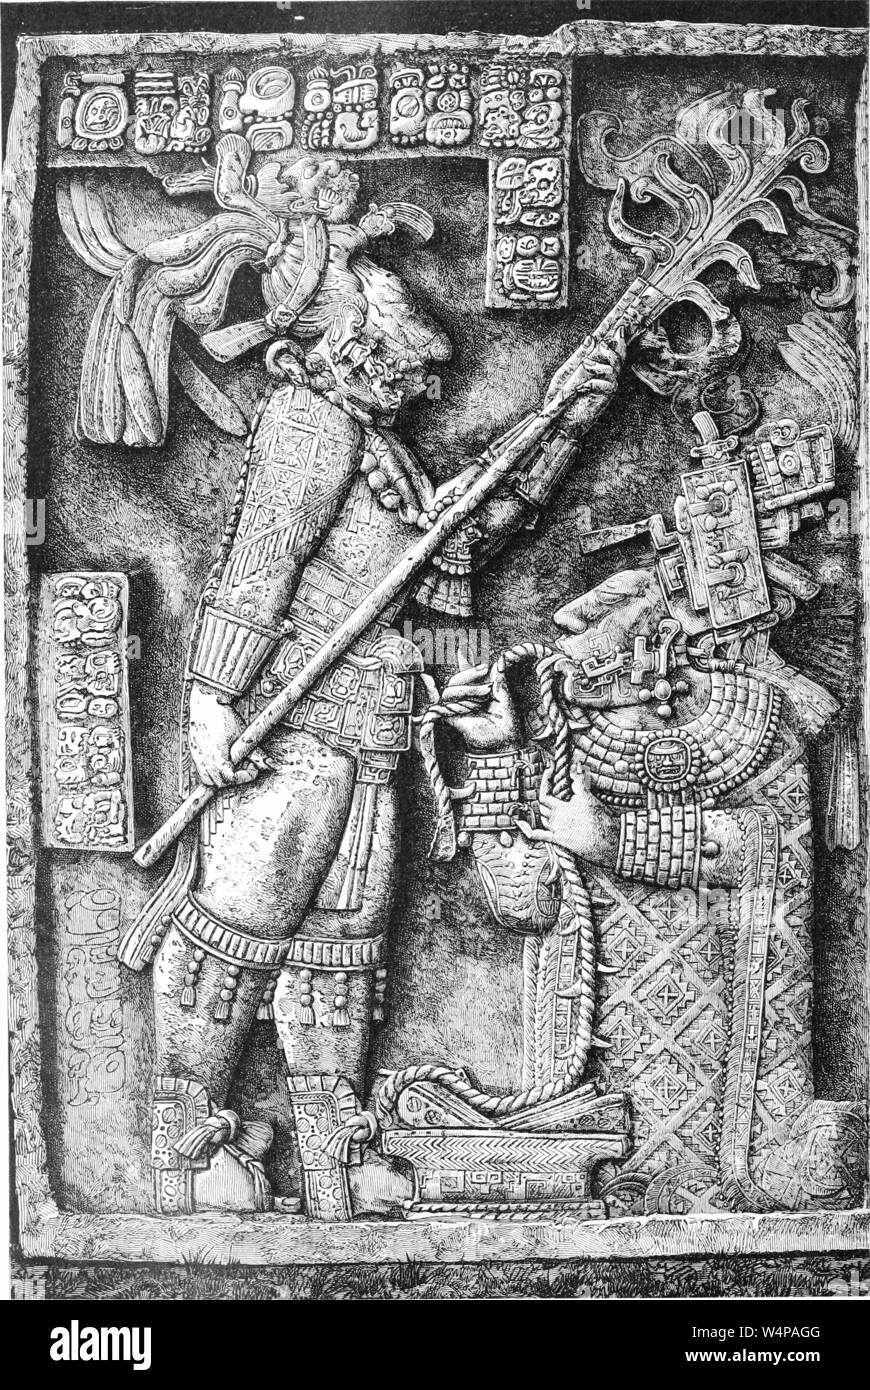 Engraving of the Aztec Sculpture, from the book 'Ridpath's Universal history' by John Clark Ridpath, 1897. Courtesy Internet Archive. () Stock Photo